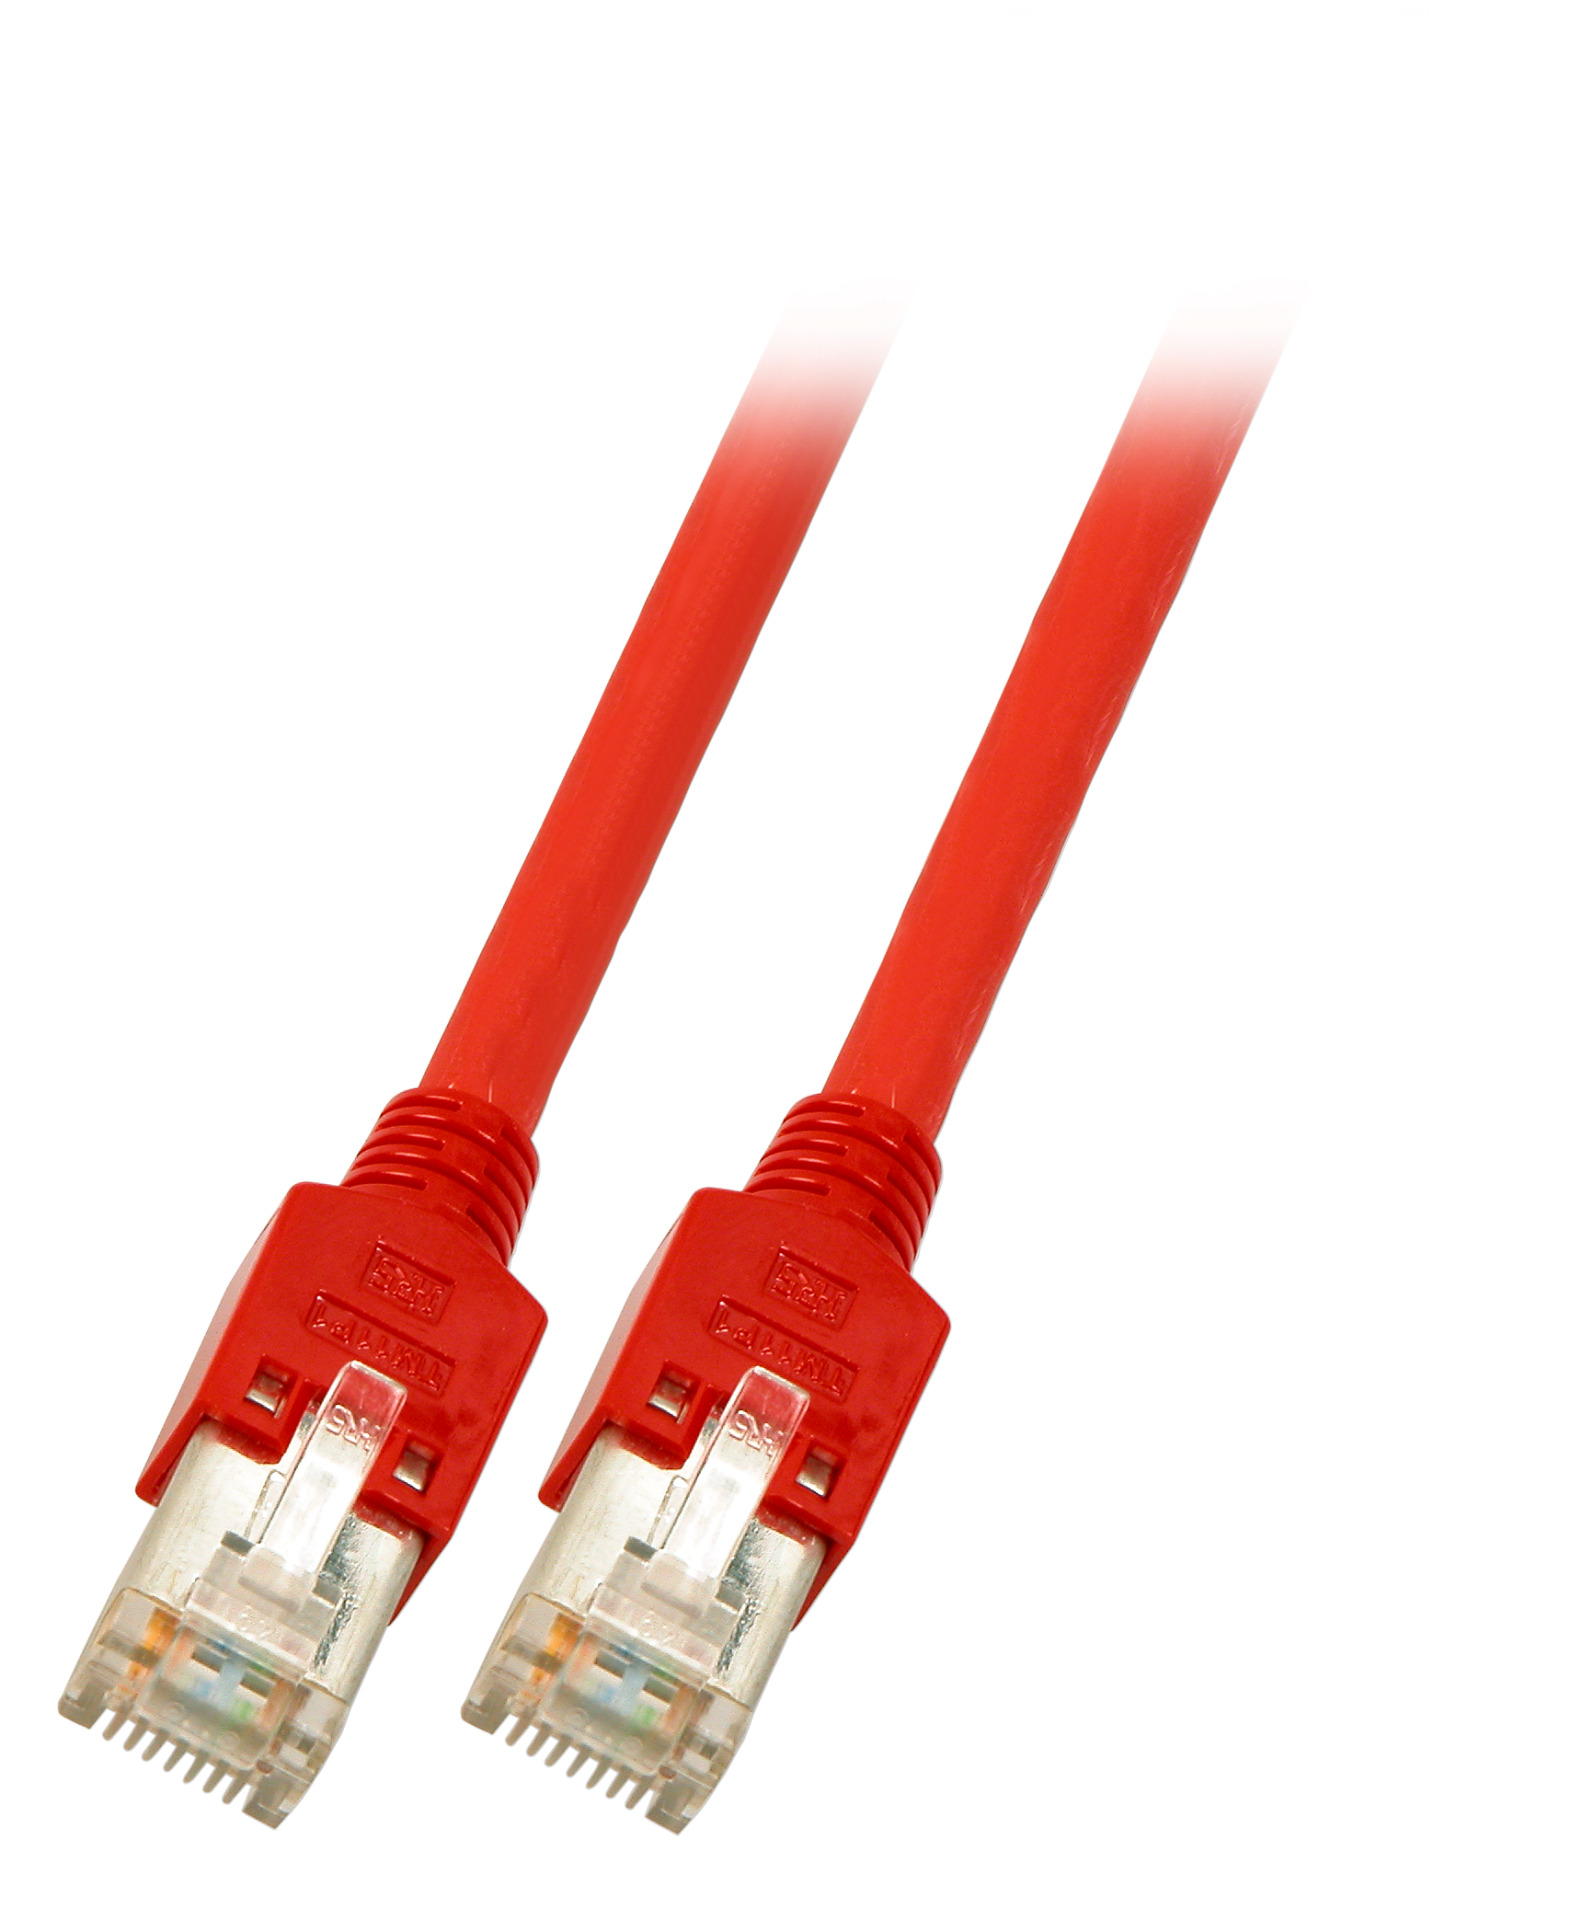 RJ45 Crossover Patch cable SF/UTP, Cat.5e, TM11, UC300, 2m, red